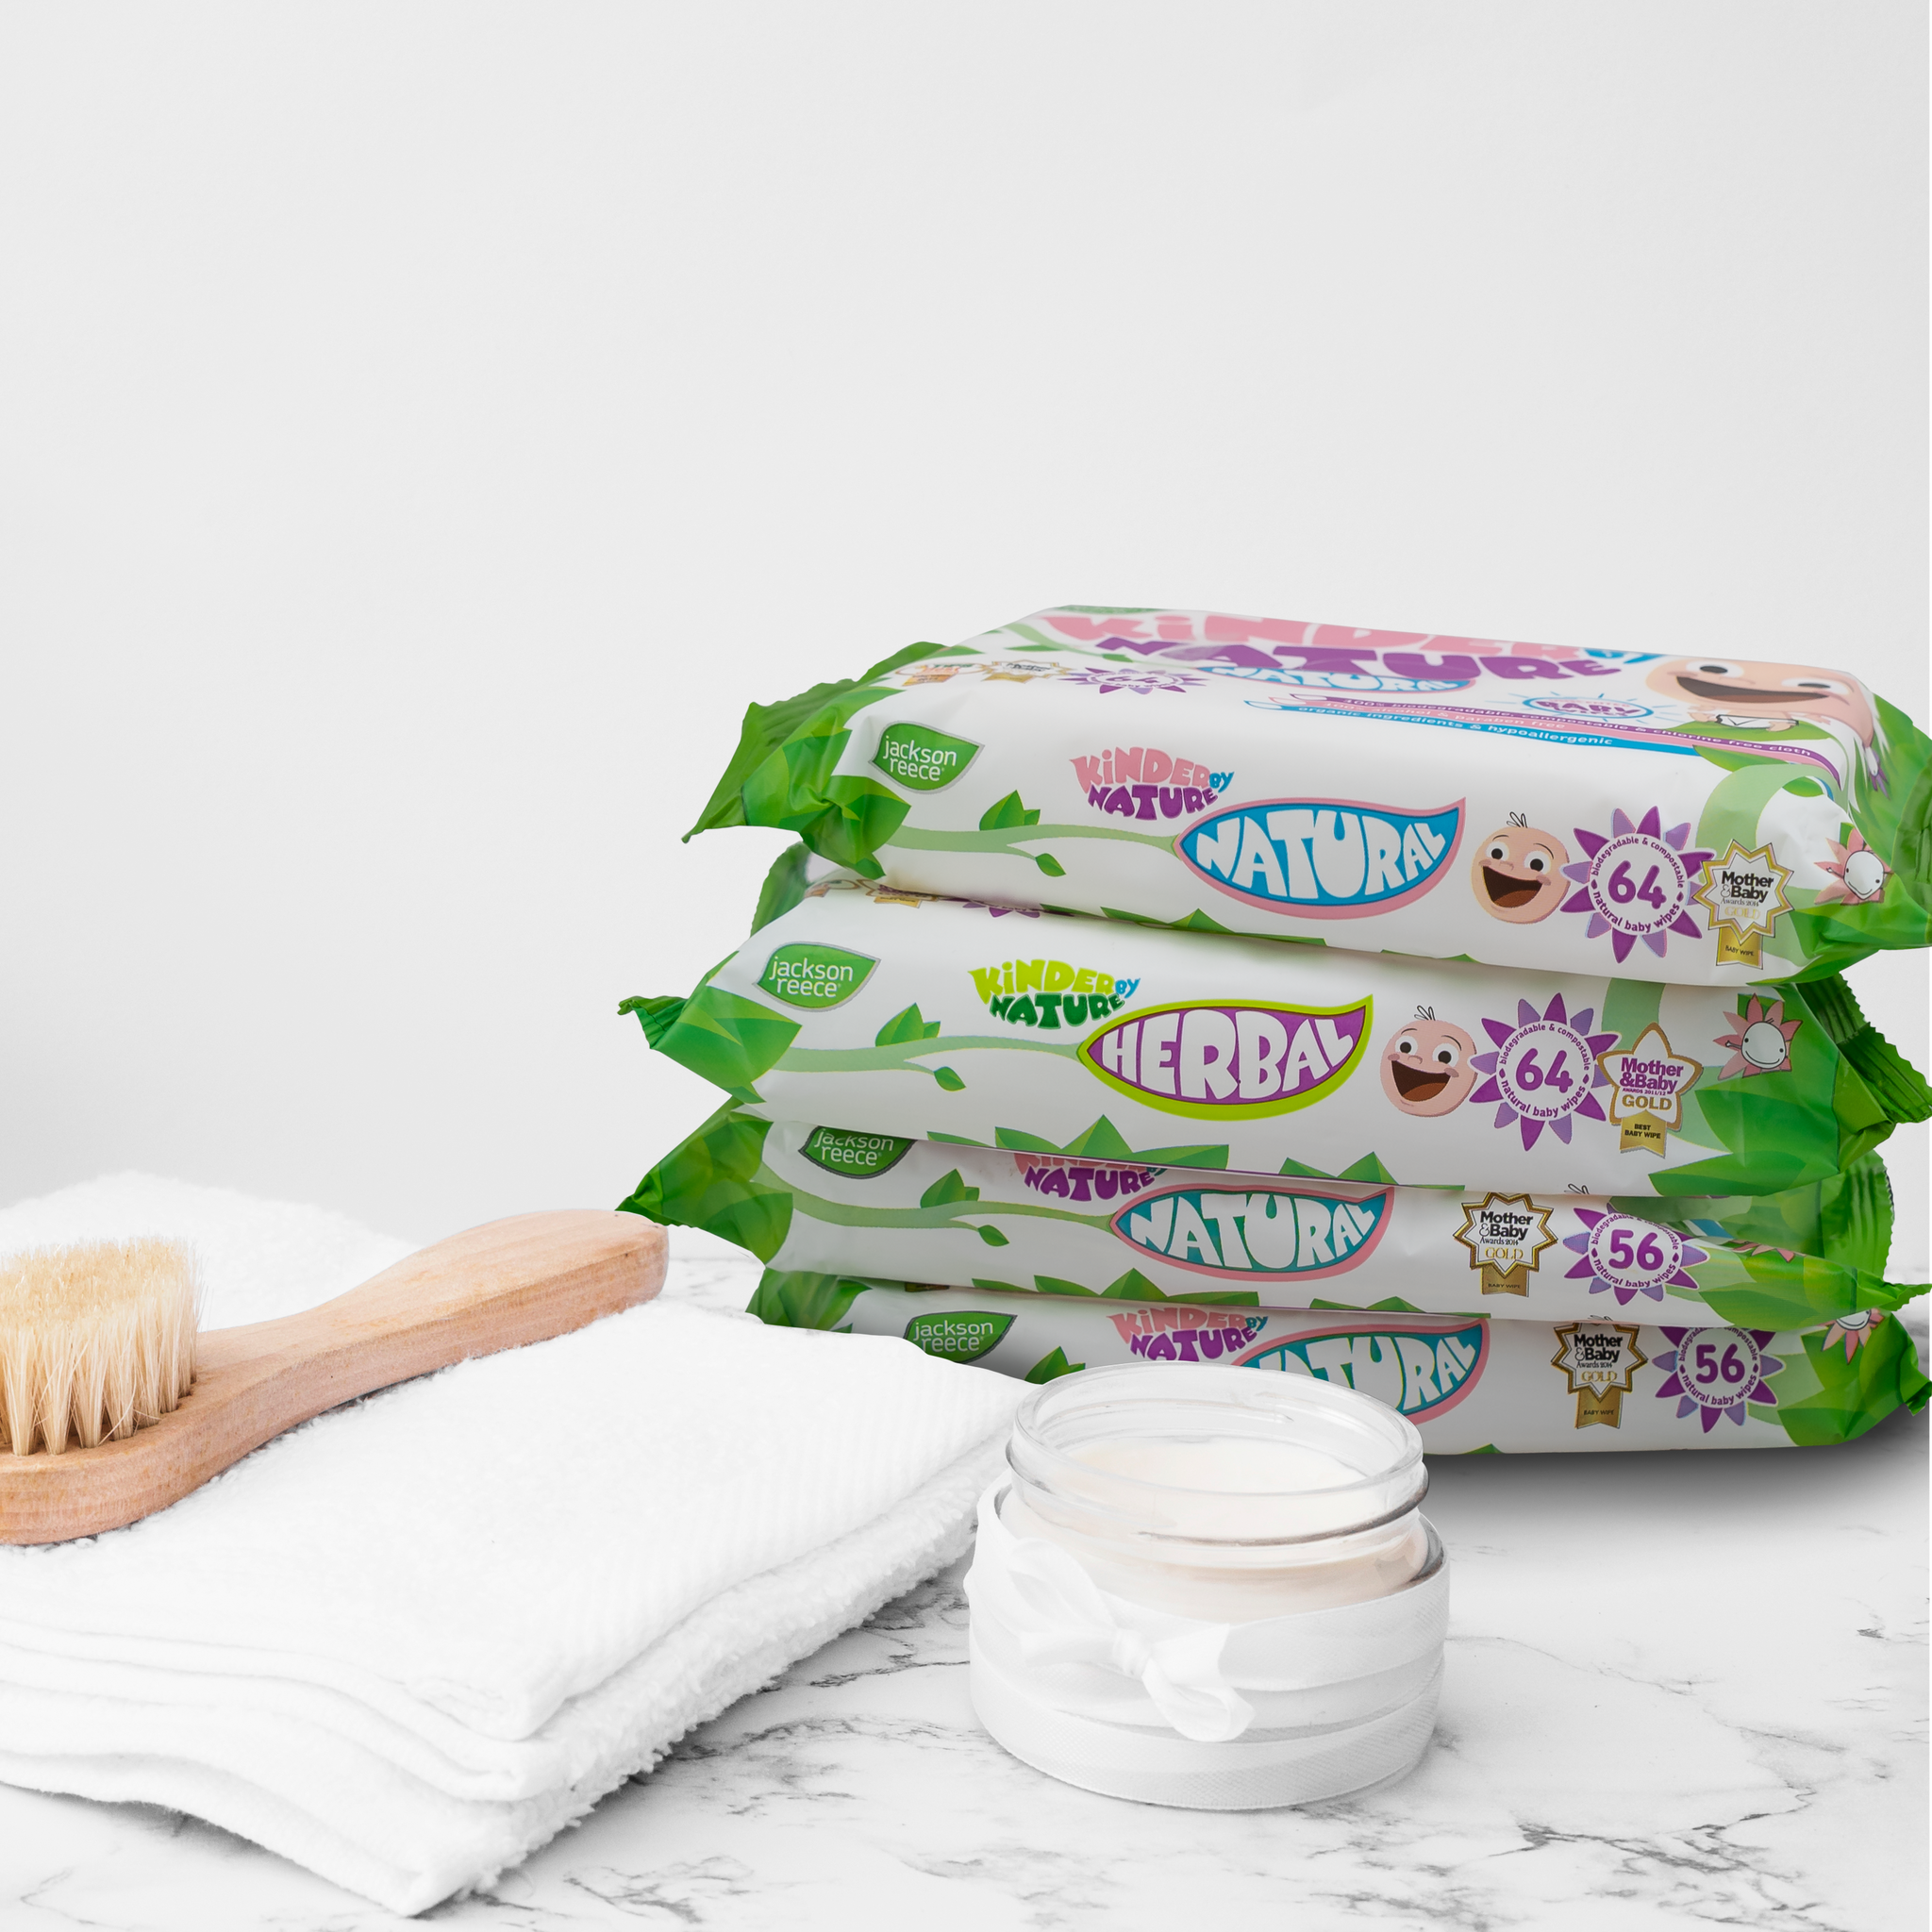 BIODEGRADABLE WIPES VS REUSABLE CLOTH WIPES